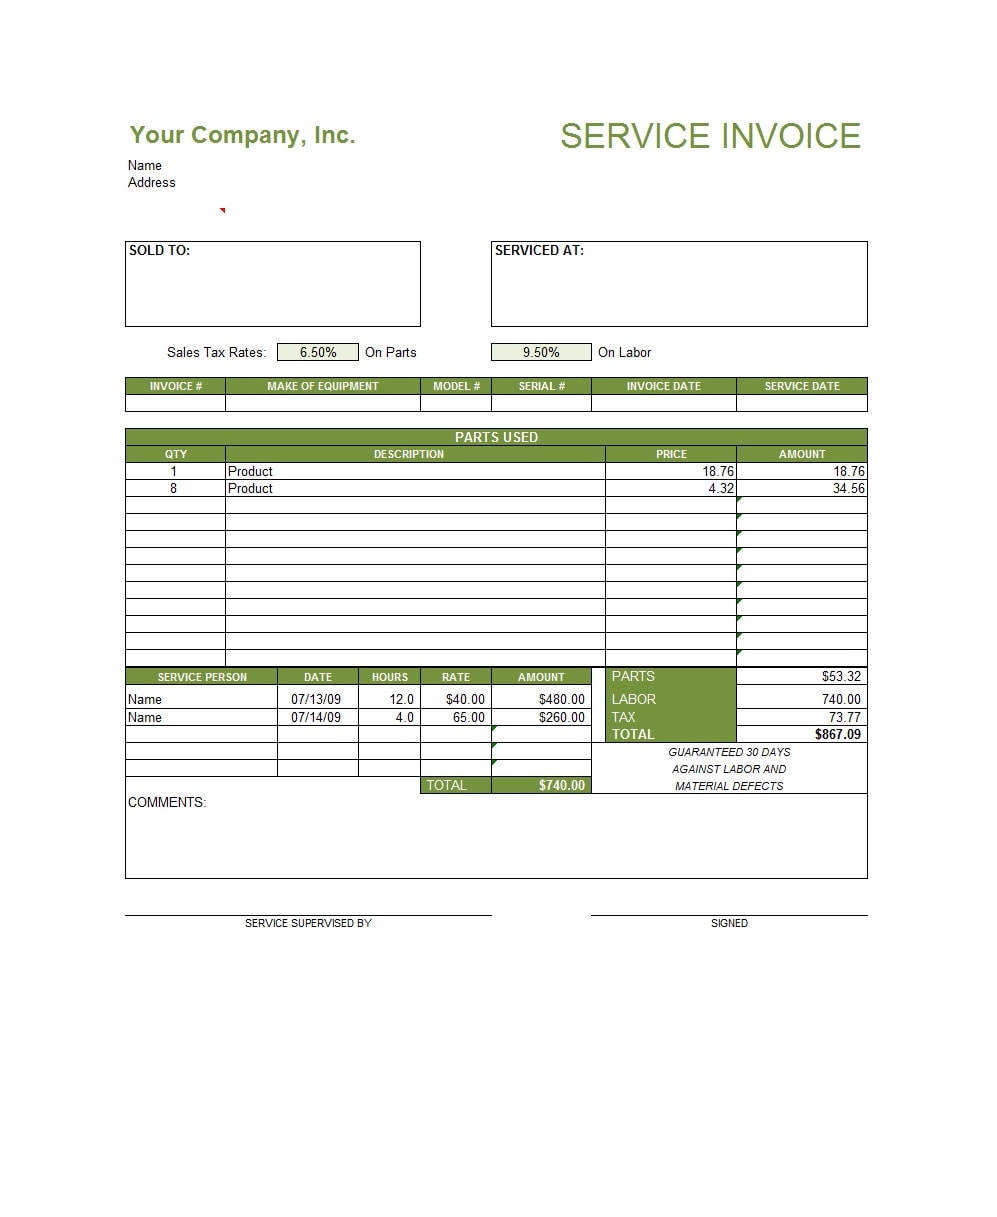 22 Simple Service Invoice Templates [MS Word] - TemplateArchive Regarding Template Of Invoice For Services Rendered